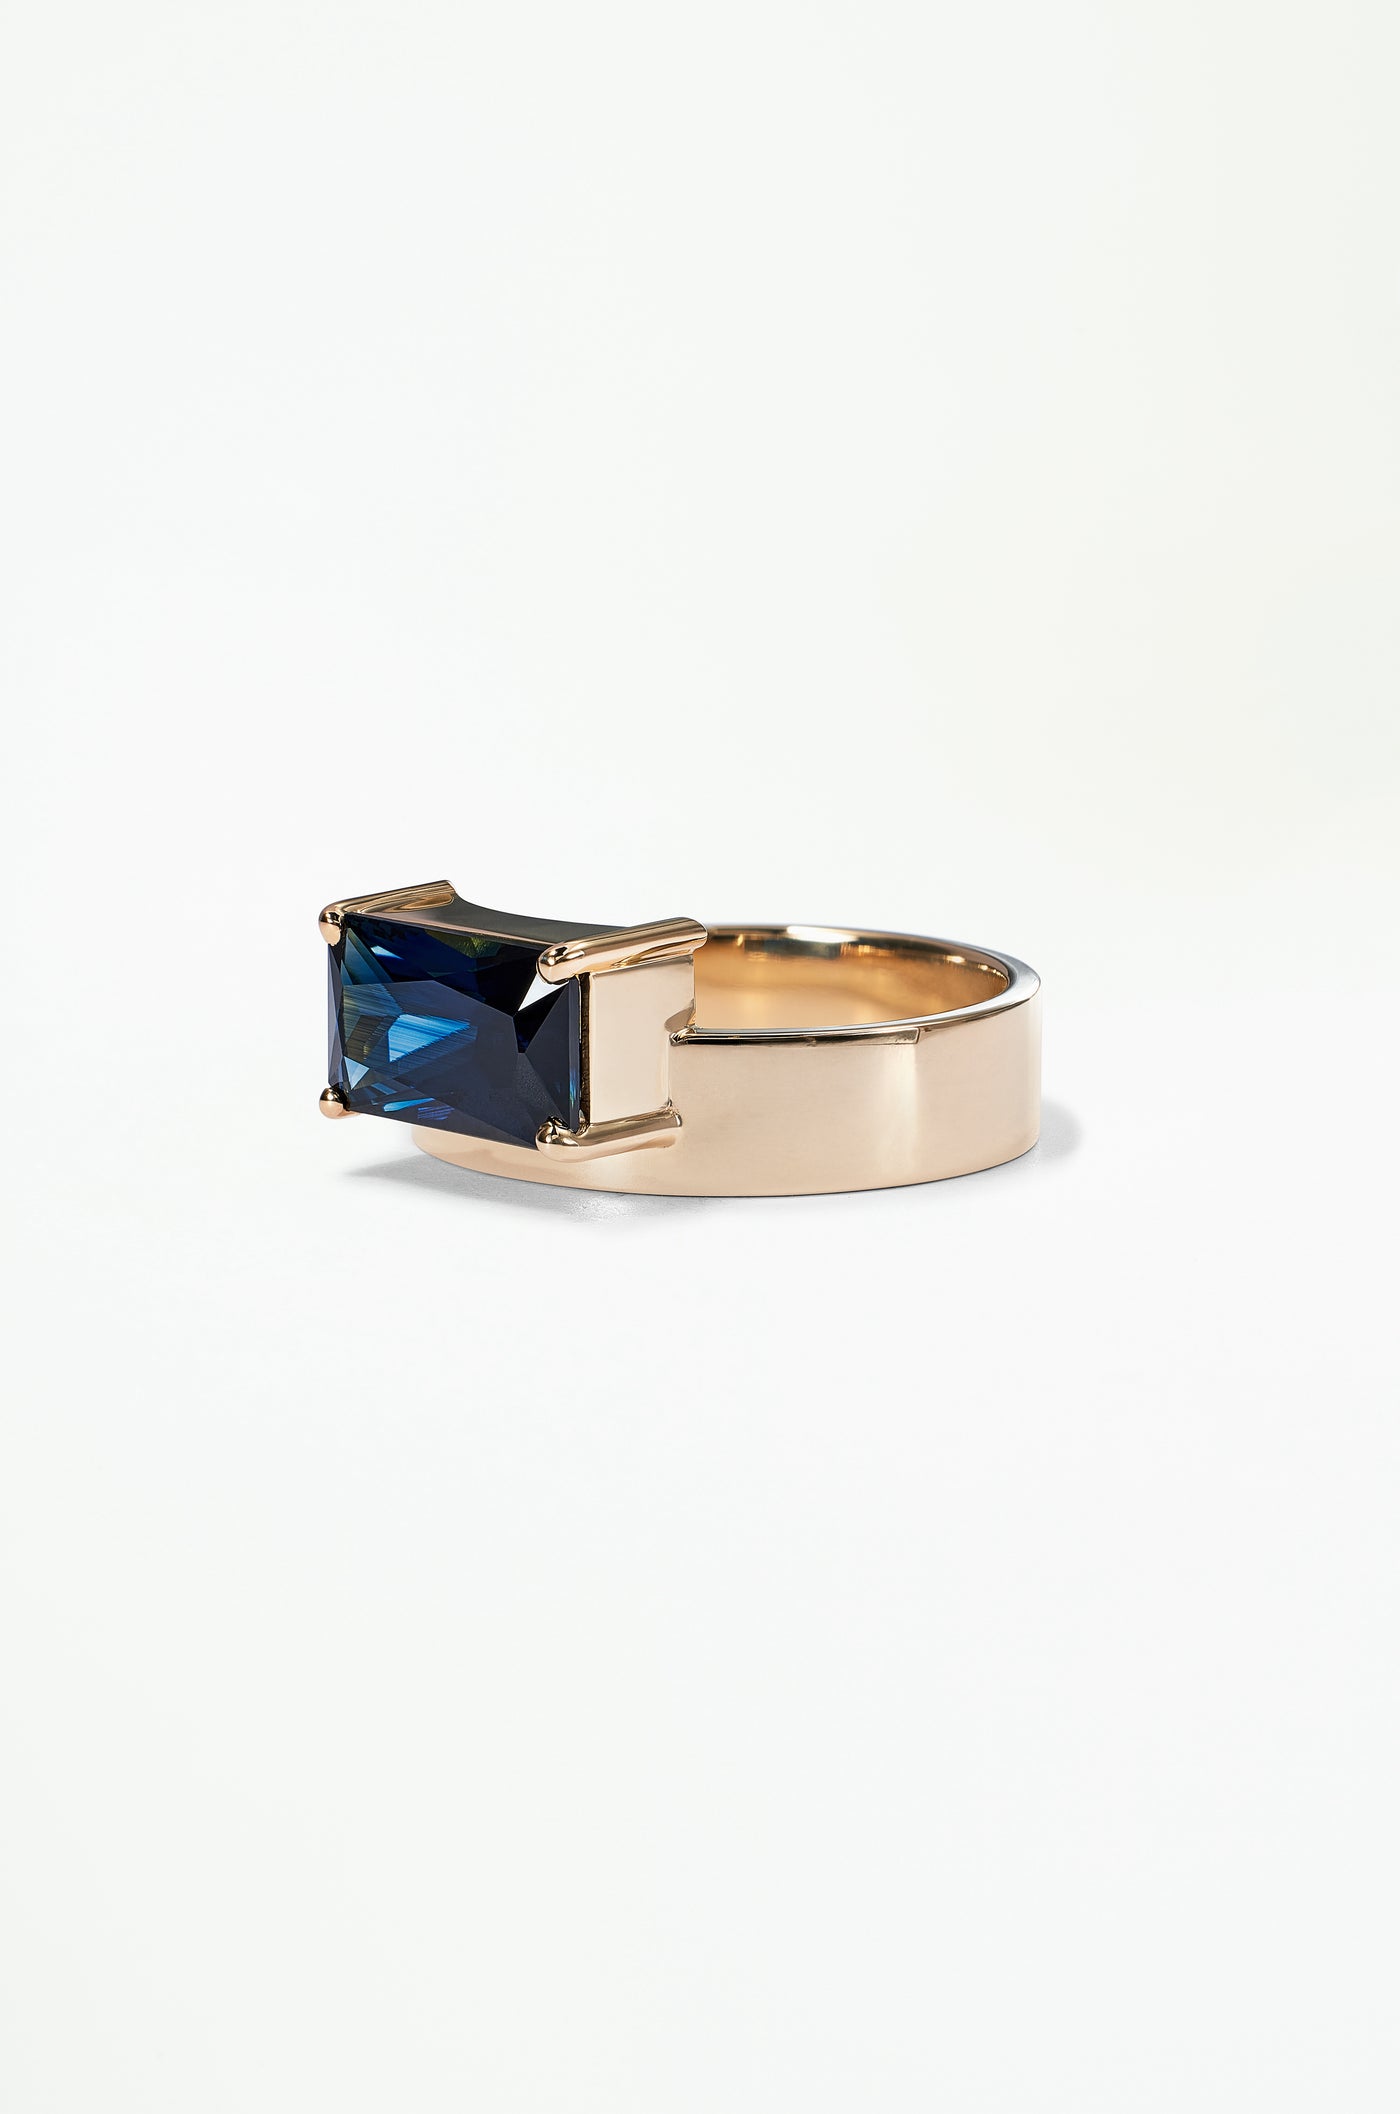 One of a Kind Emerald Cut Sapphire Monolith Ring No. 9